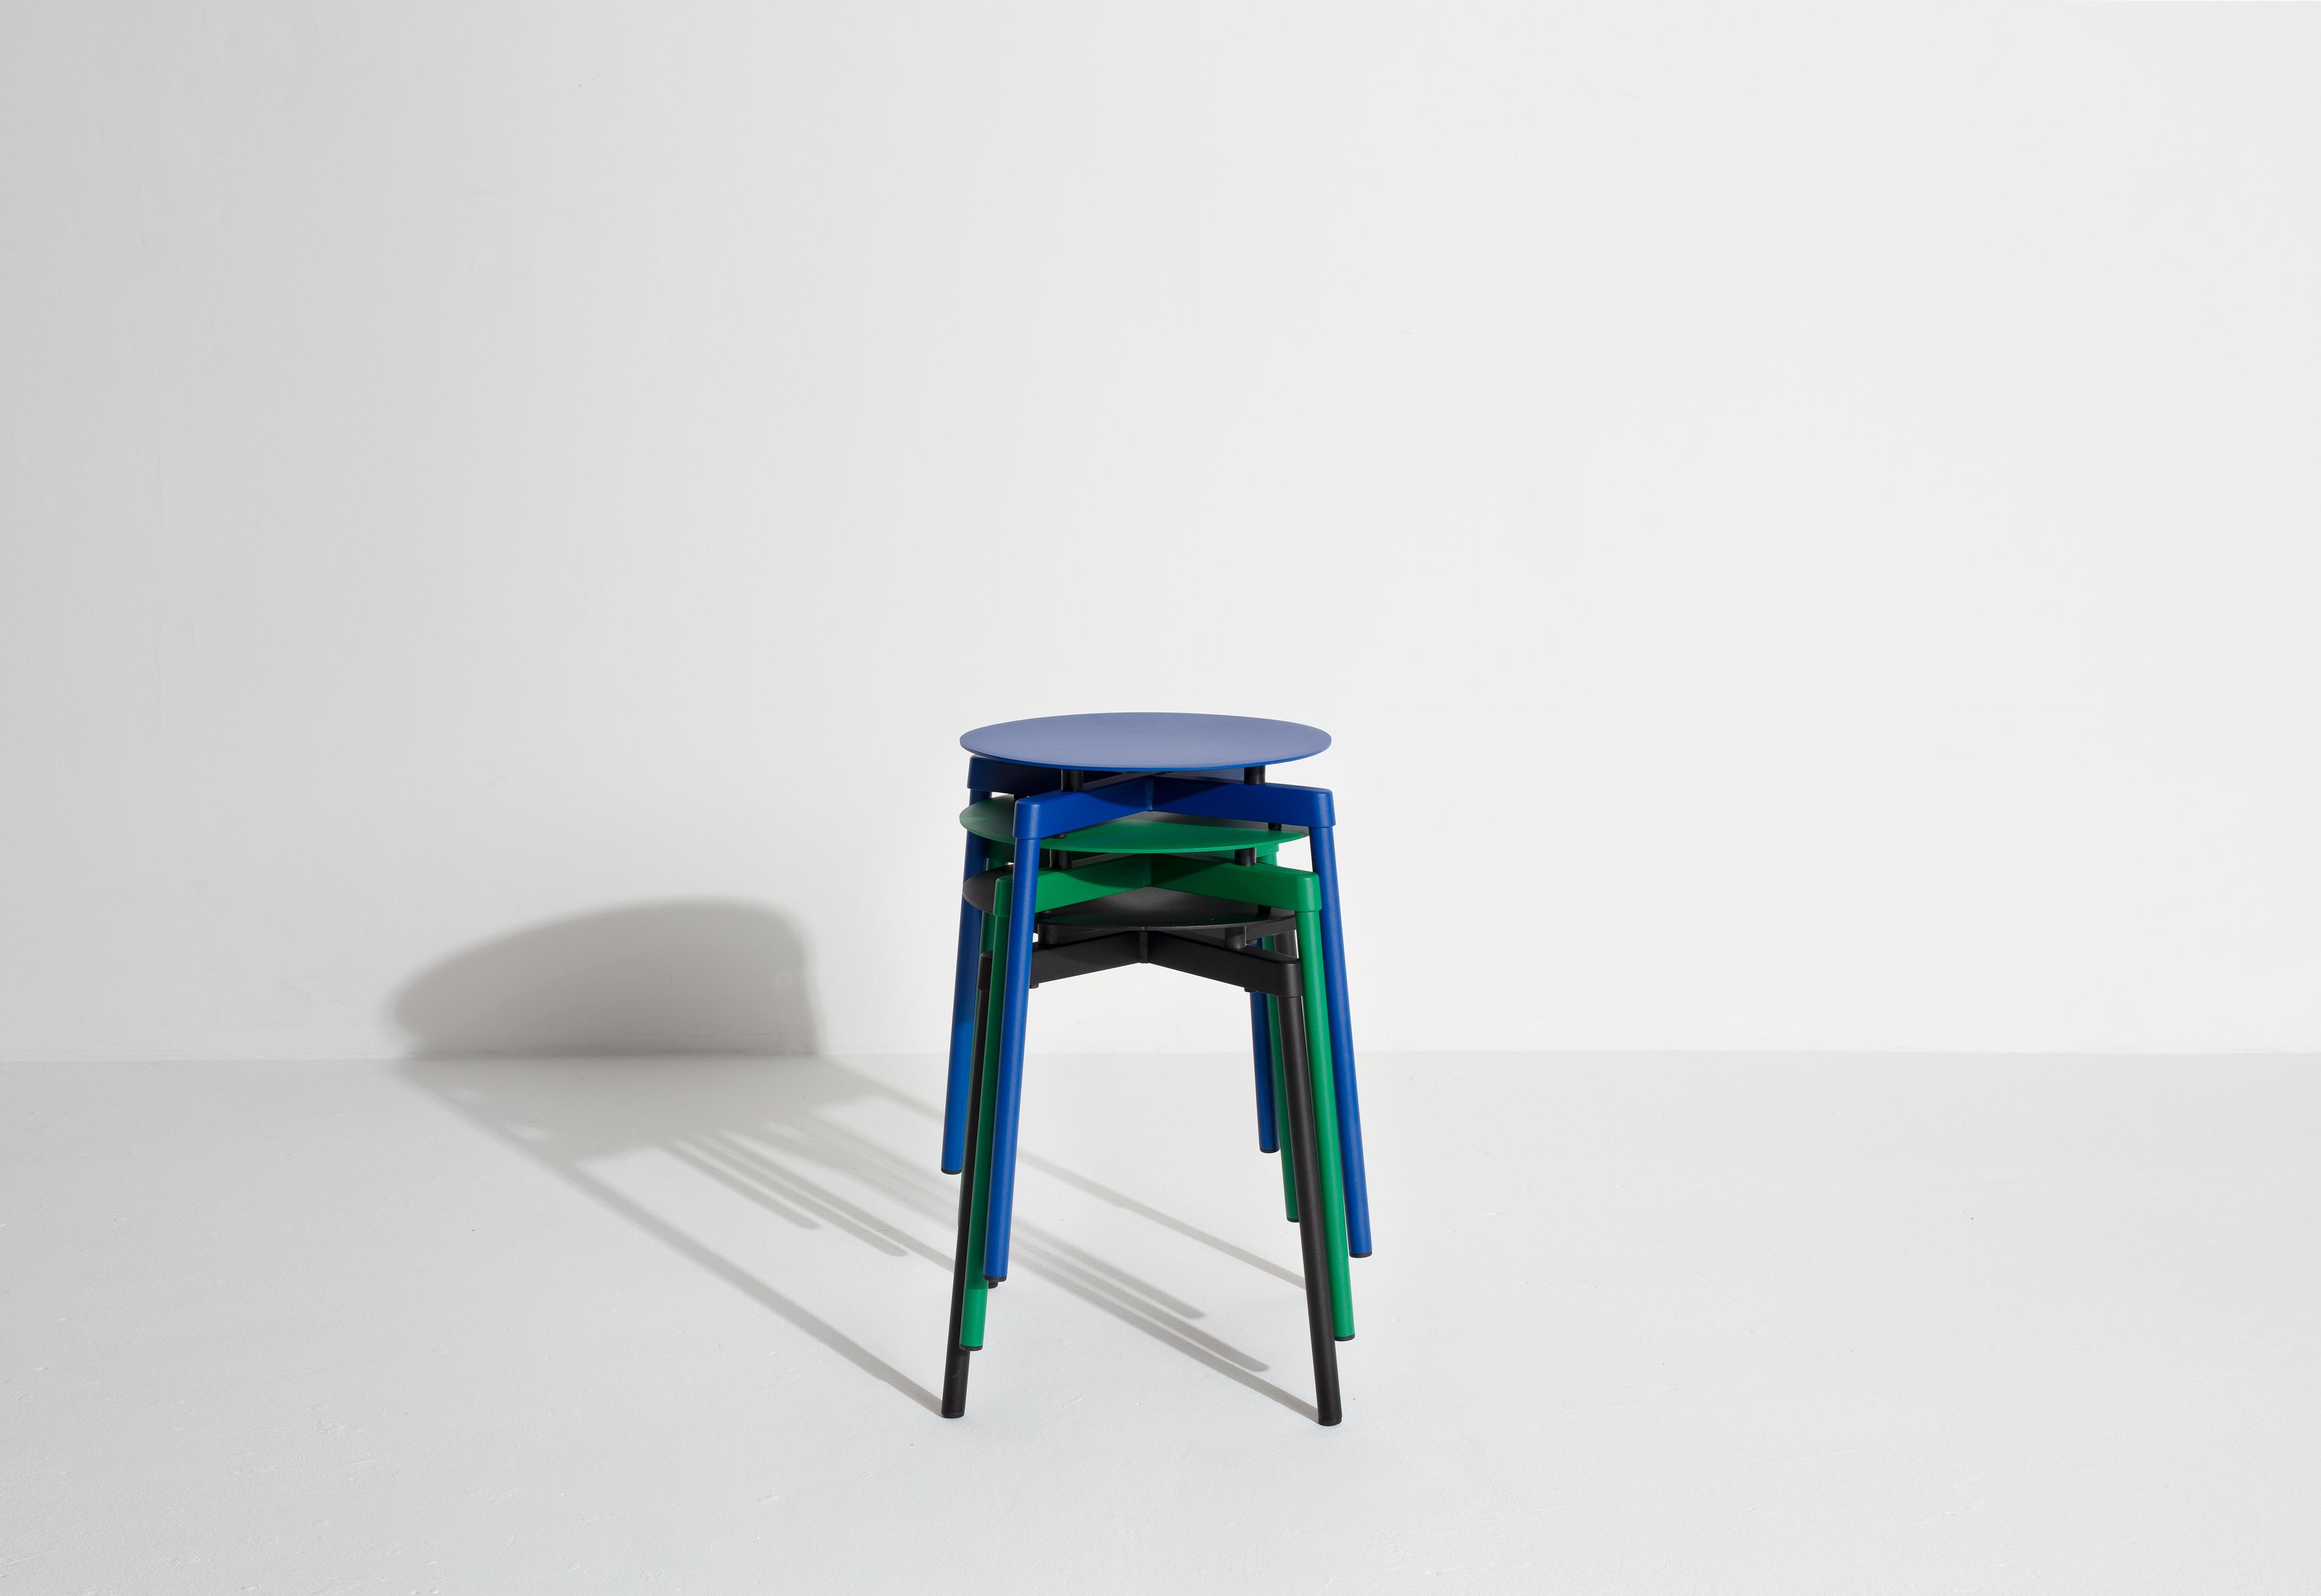 Contemporary Petite Friture Fromme Stool in Mint-Green Aluminium by Tom Chung, 2020 For Sale